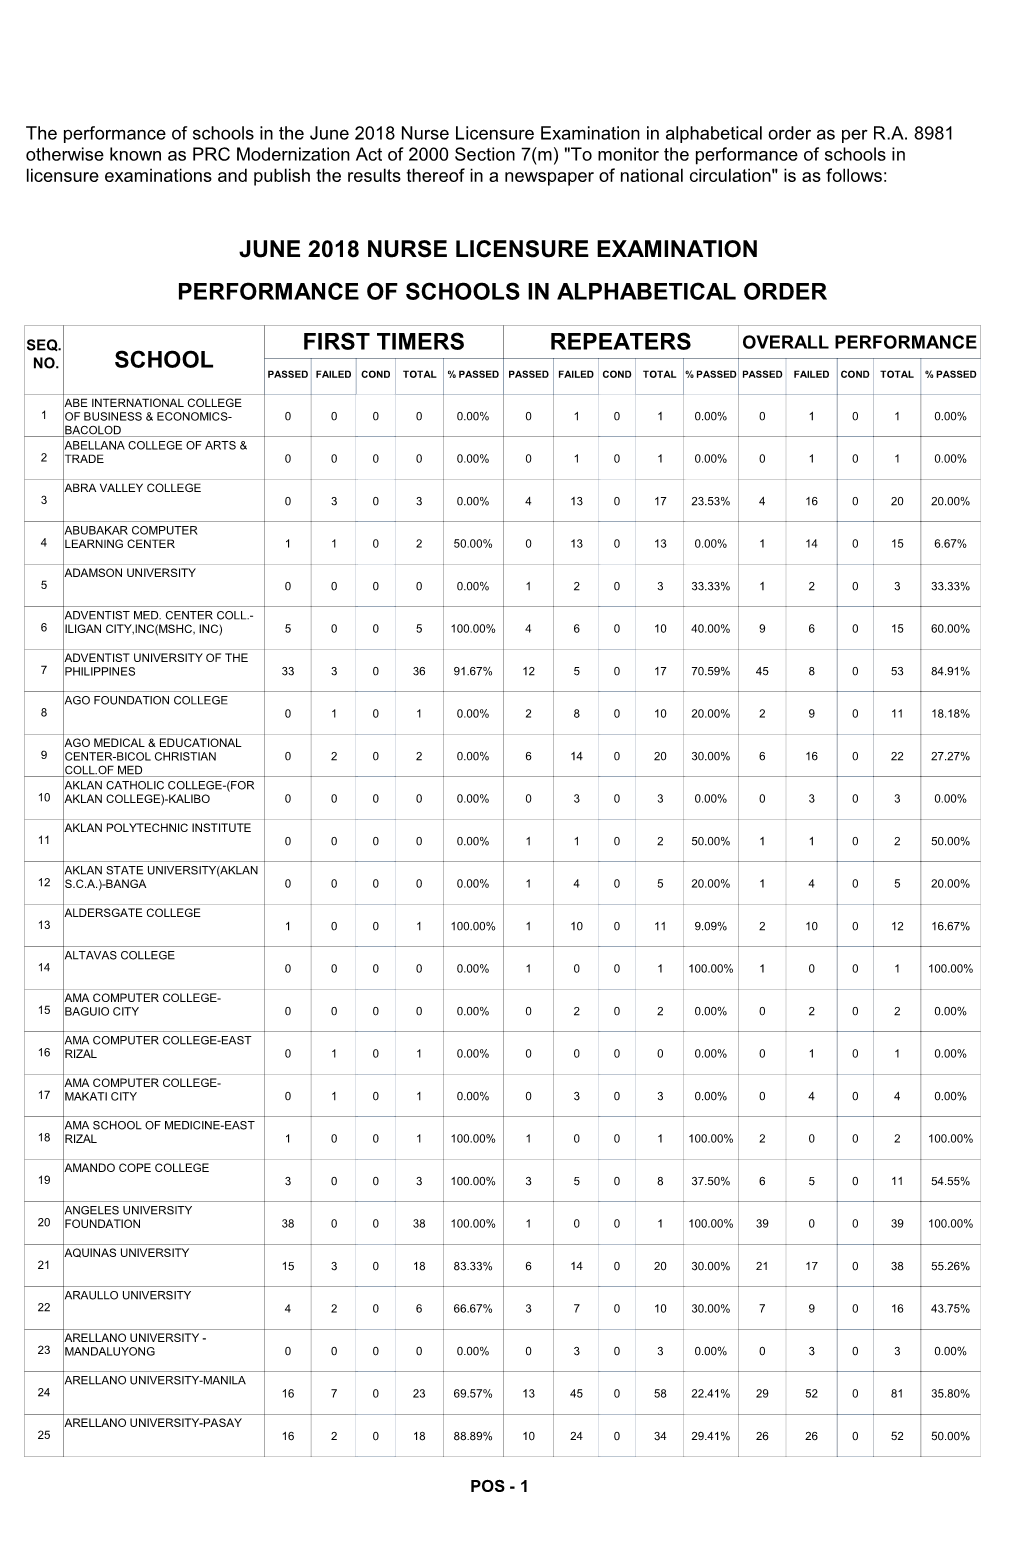 The Performance of Schools in the June 2018 Nurse Licensure Examination in Alphabetical Order As Per R.A